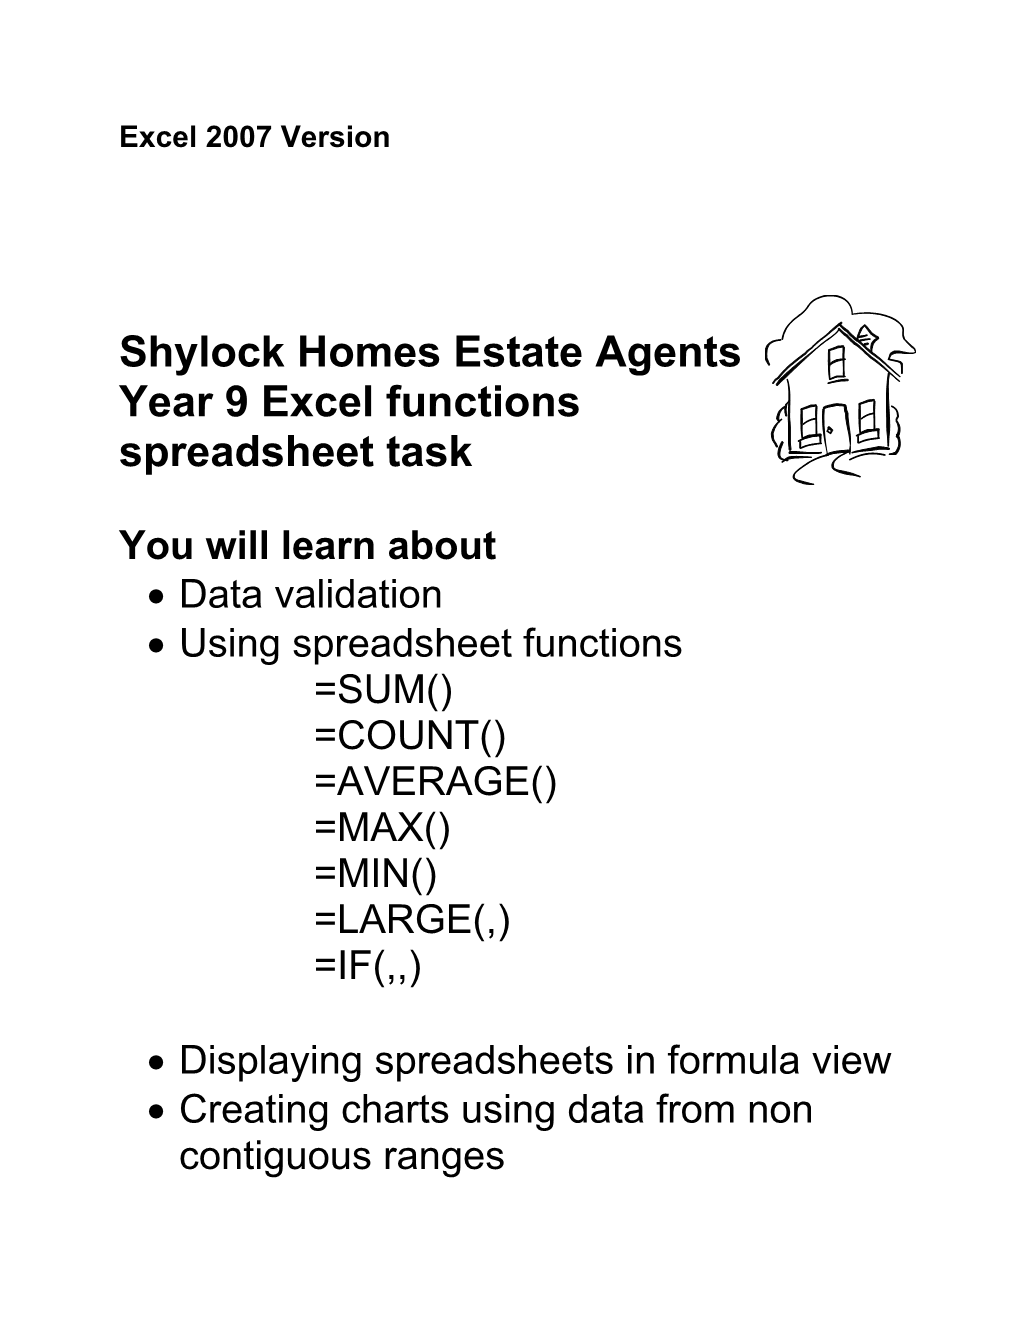 This Exercise Is About a Firm of Estate Agents Who Use a Spreadsheet to Show the Values